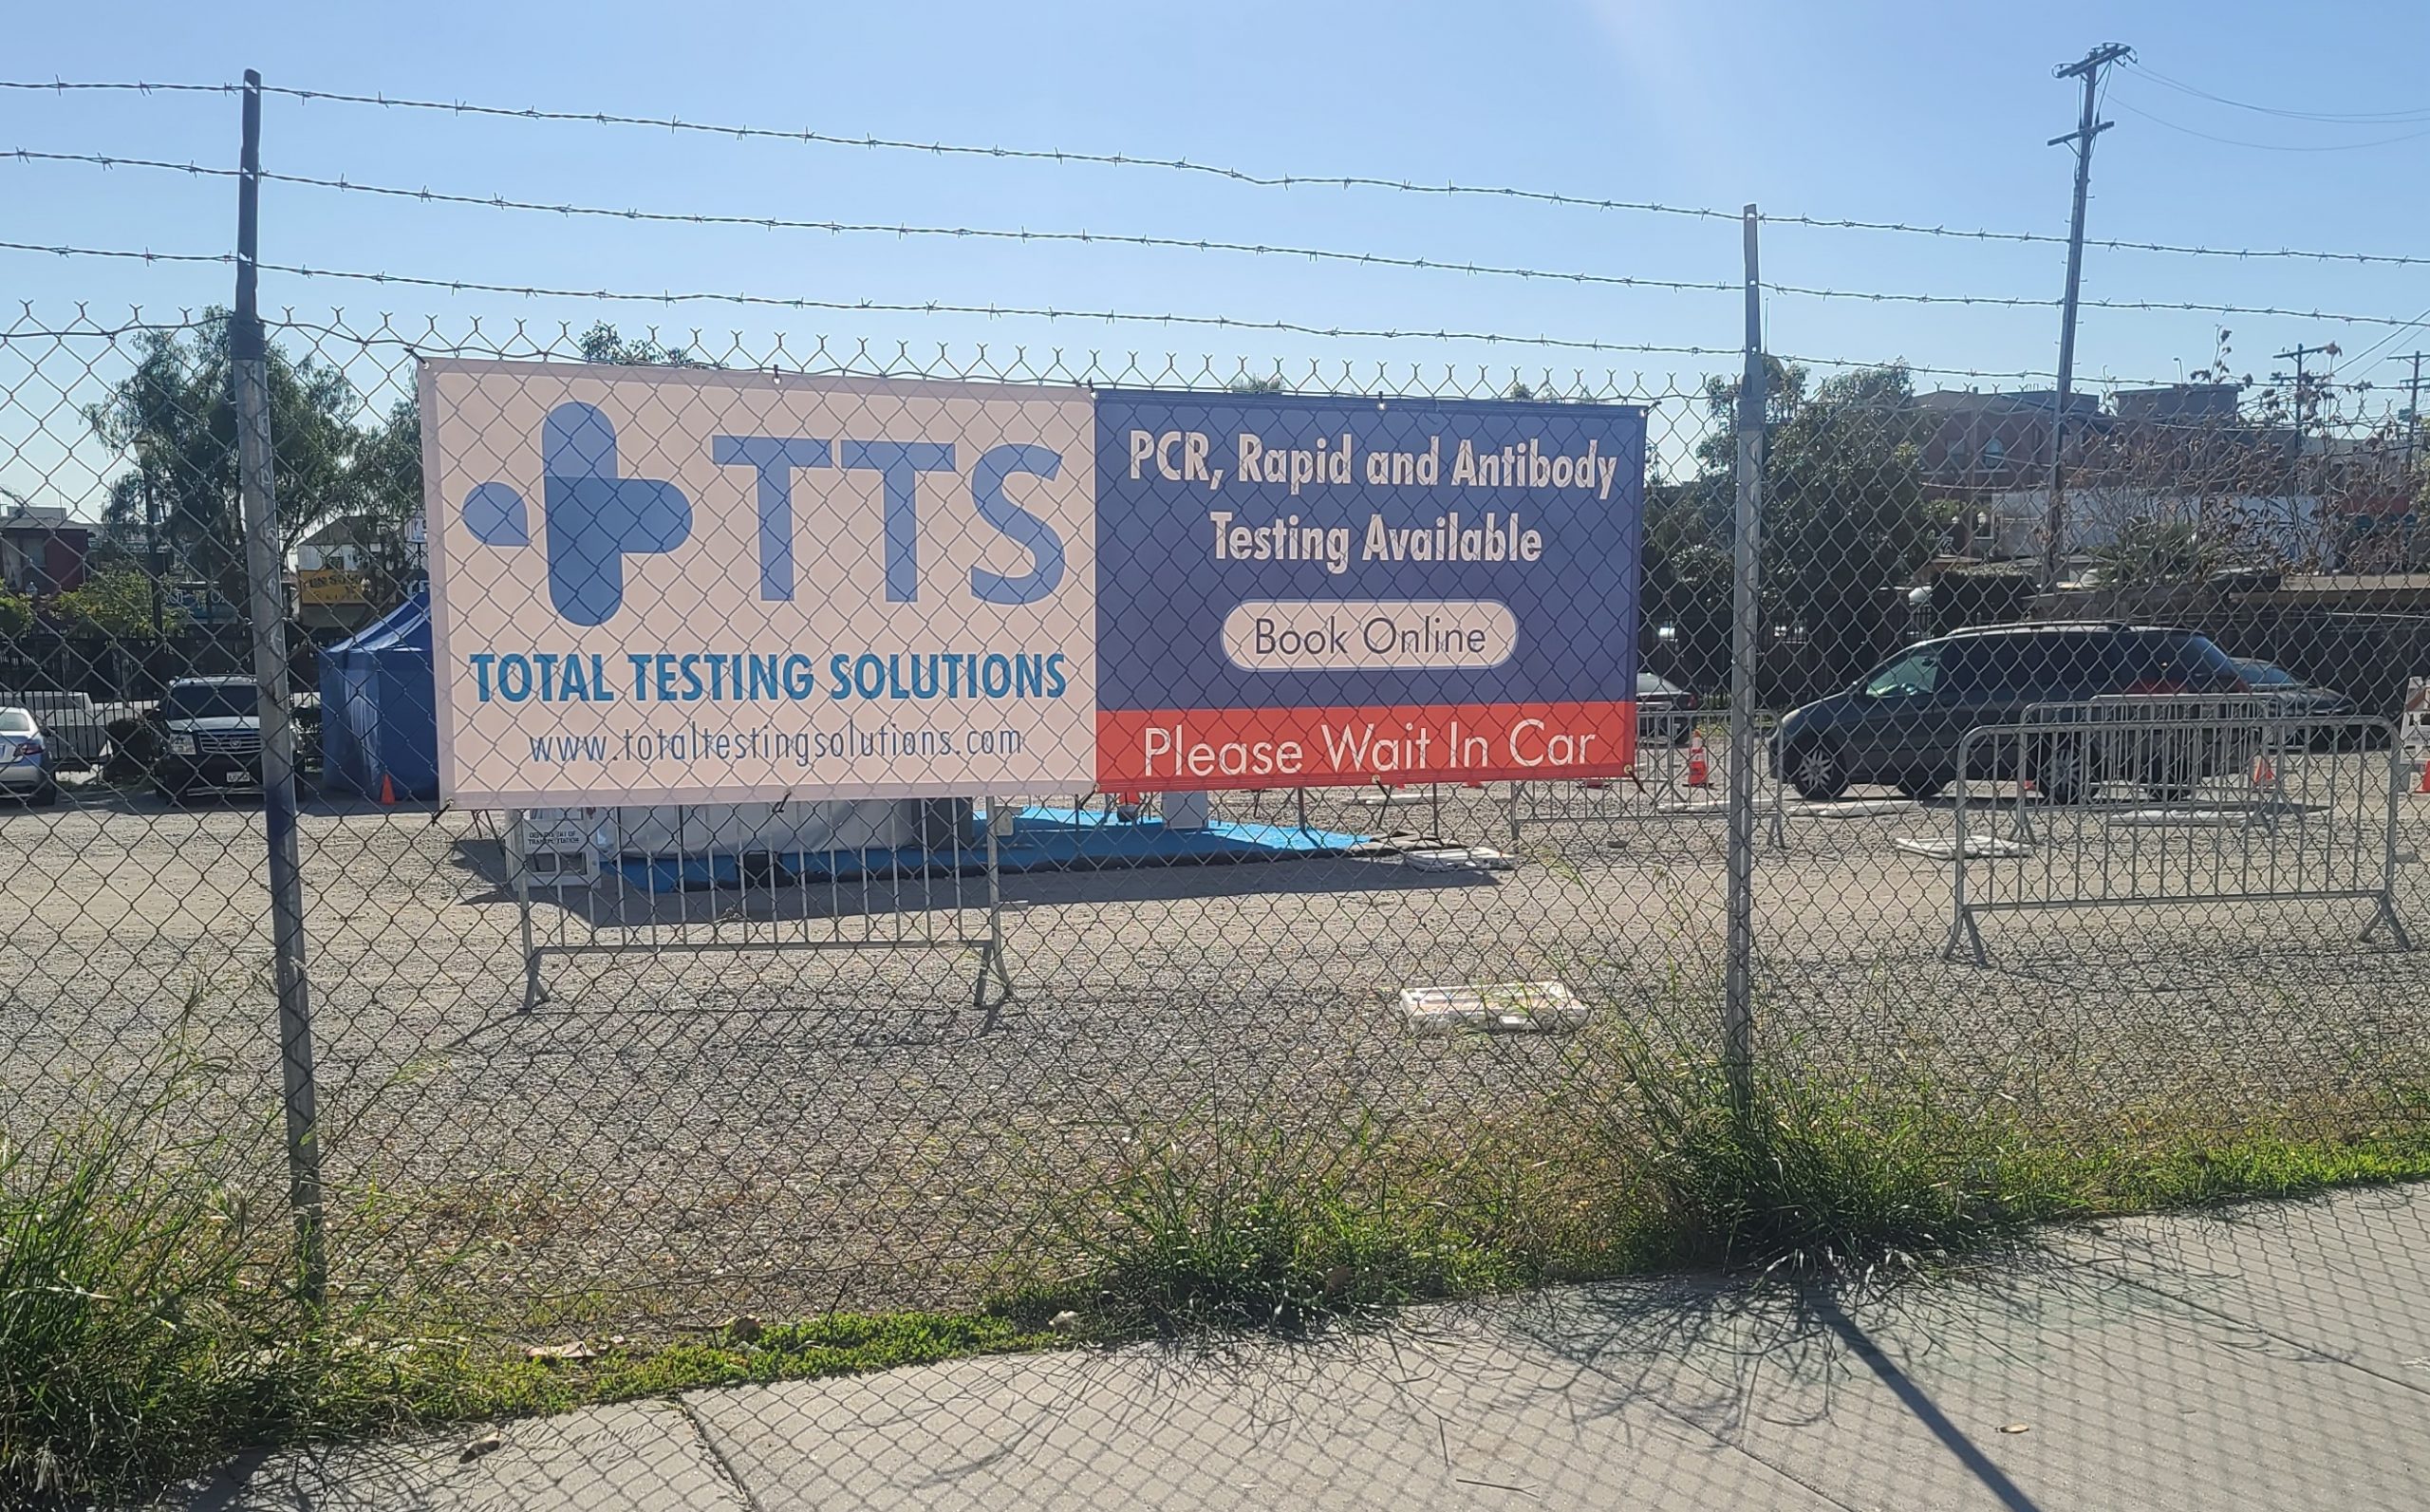 Here are two smaller custom banners for Total Testing Solutions' downtown Los Angeles location. These are part of the extensive sign package.﻿﻿